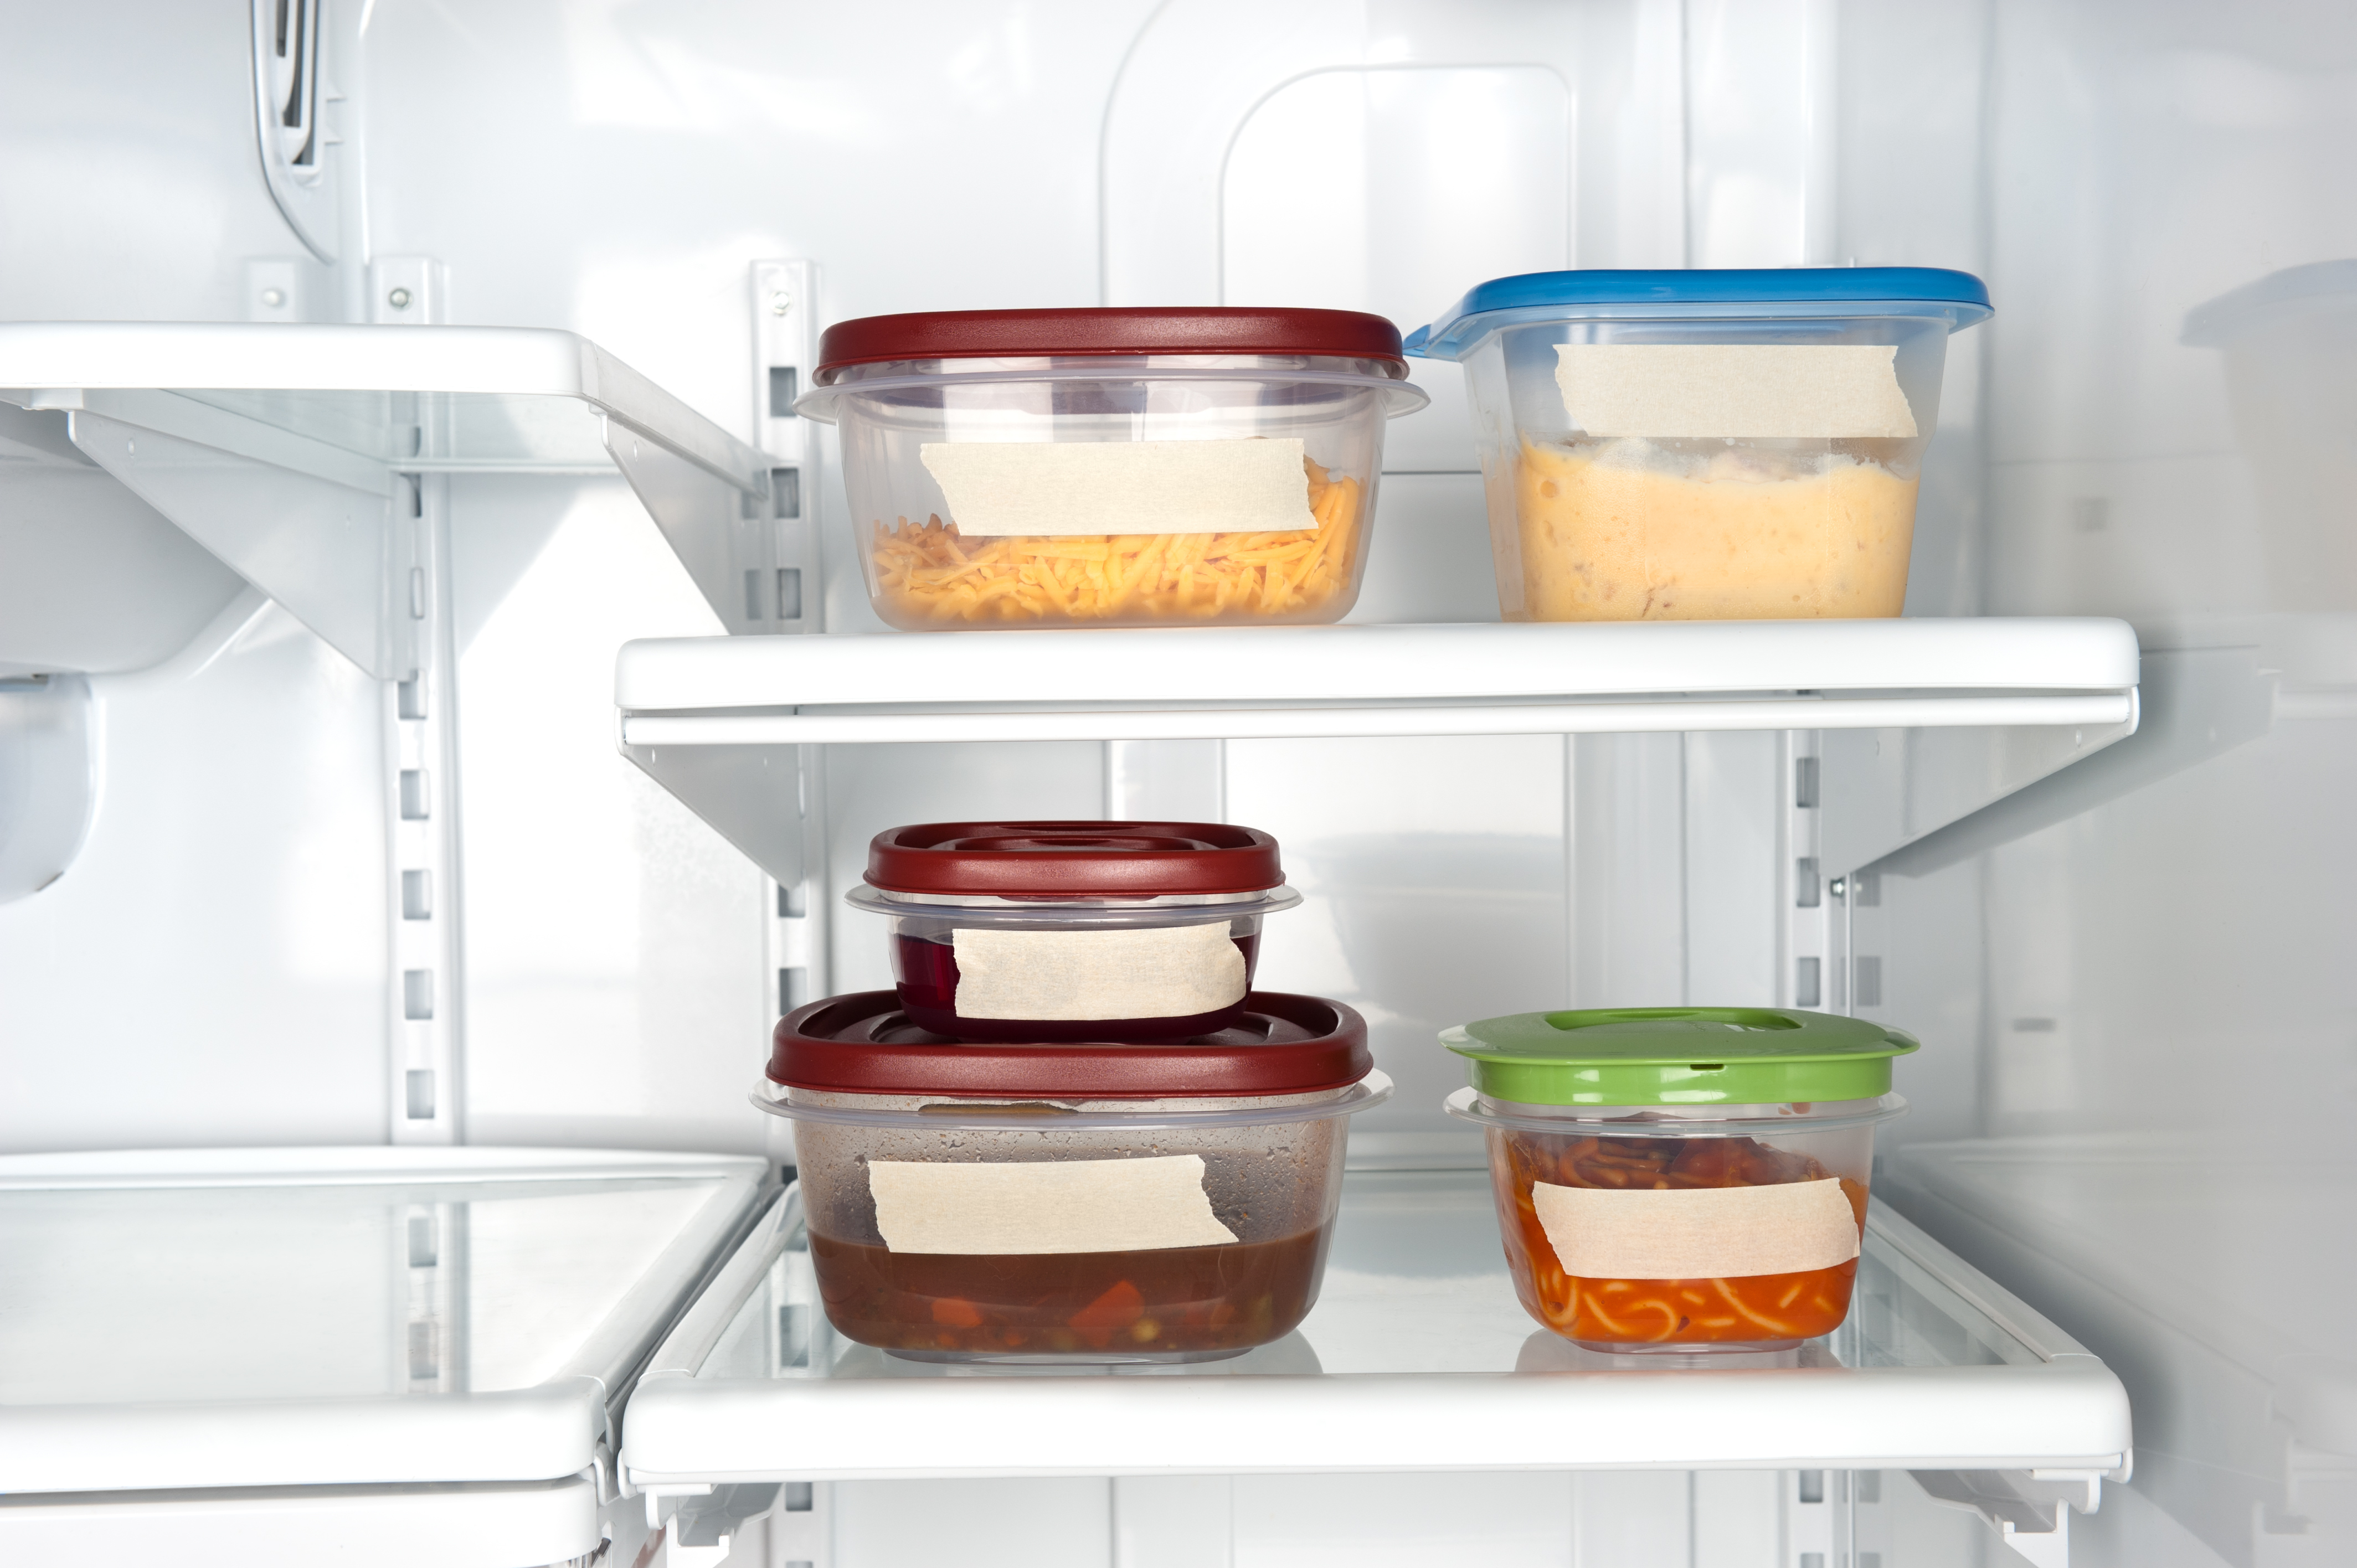 Five plastic containers filled with food with white labels in a refrigerator.